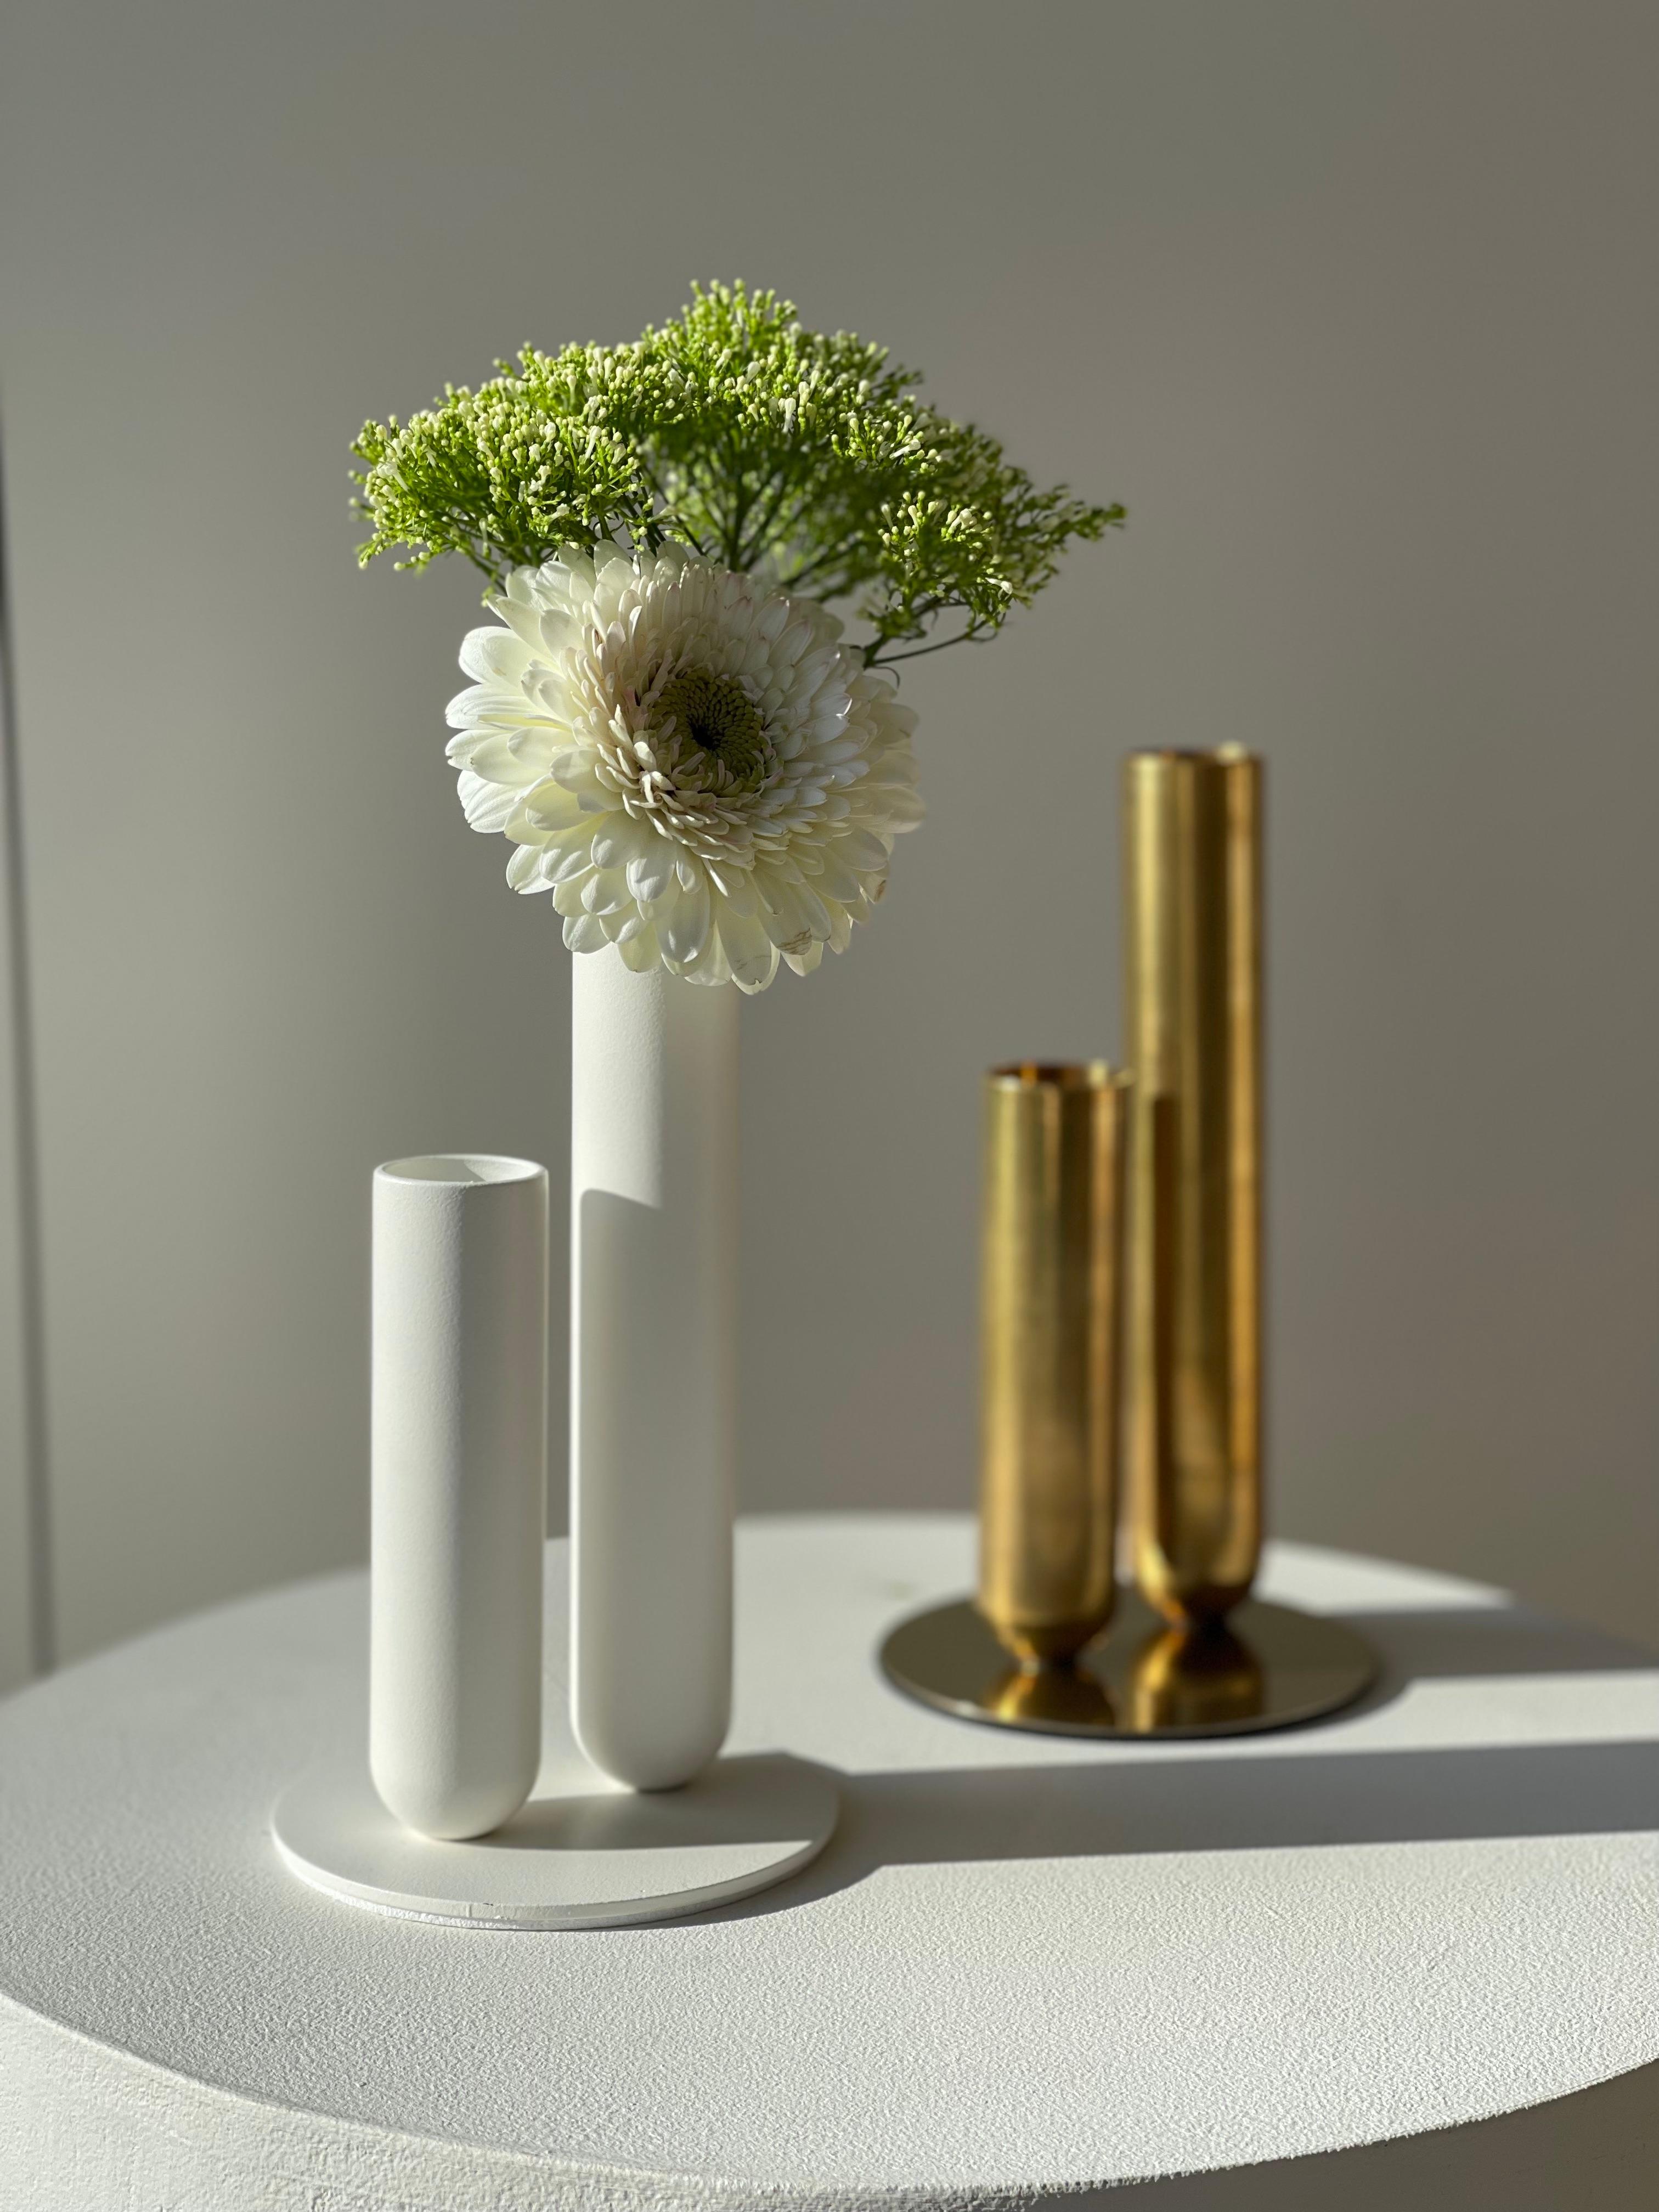 Turned Set of 2 Soliflore White Vases by Mademoiselle Jo For Sale